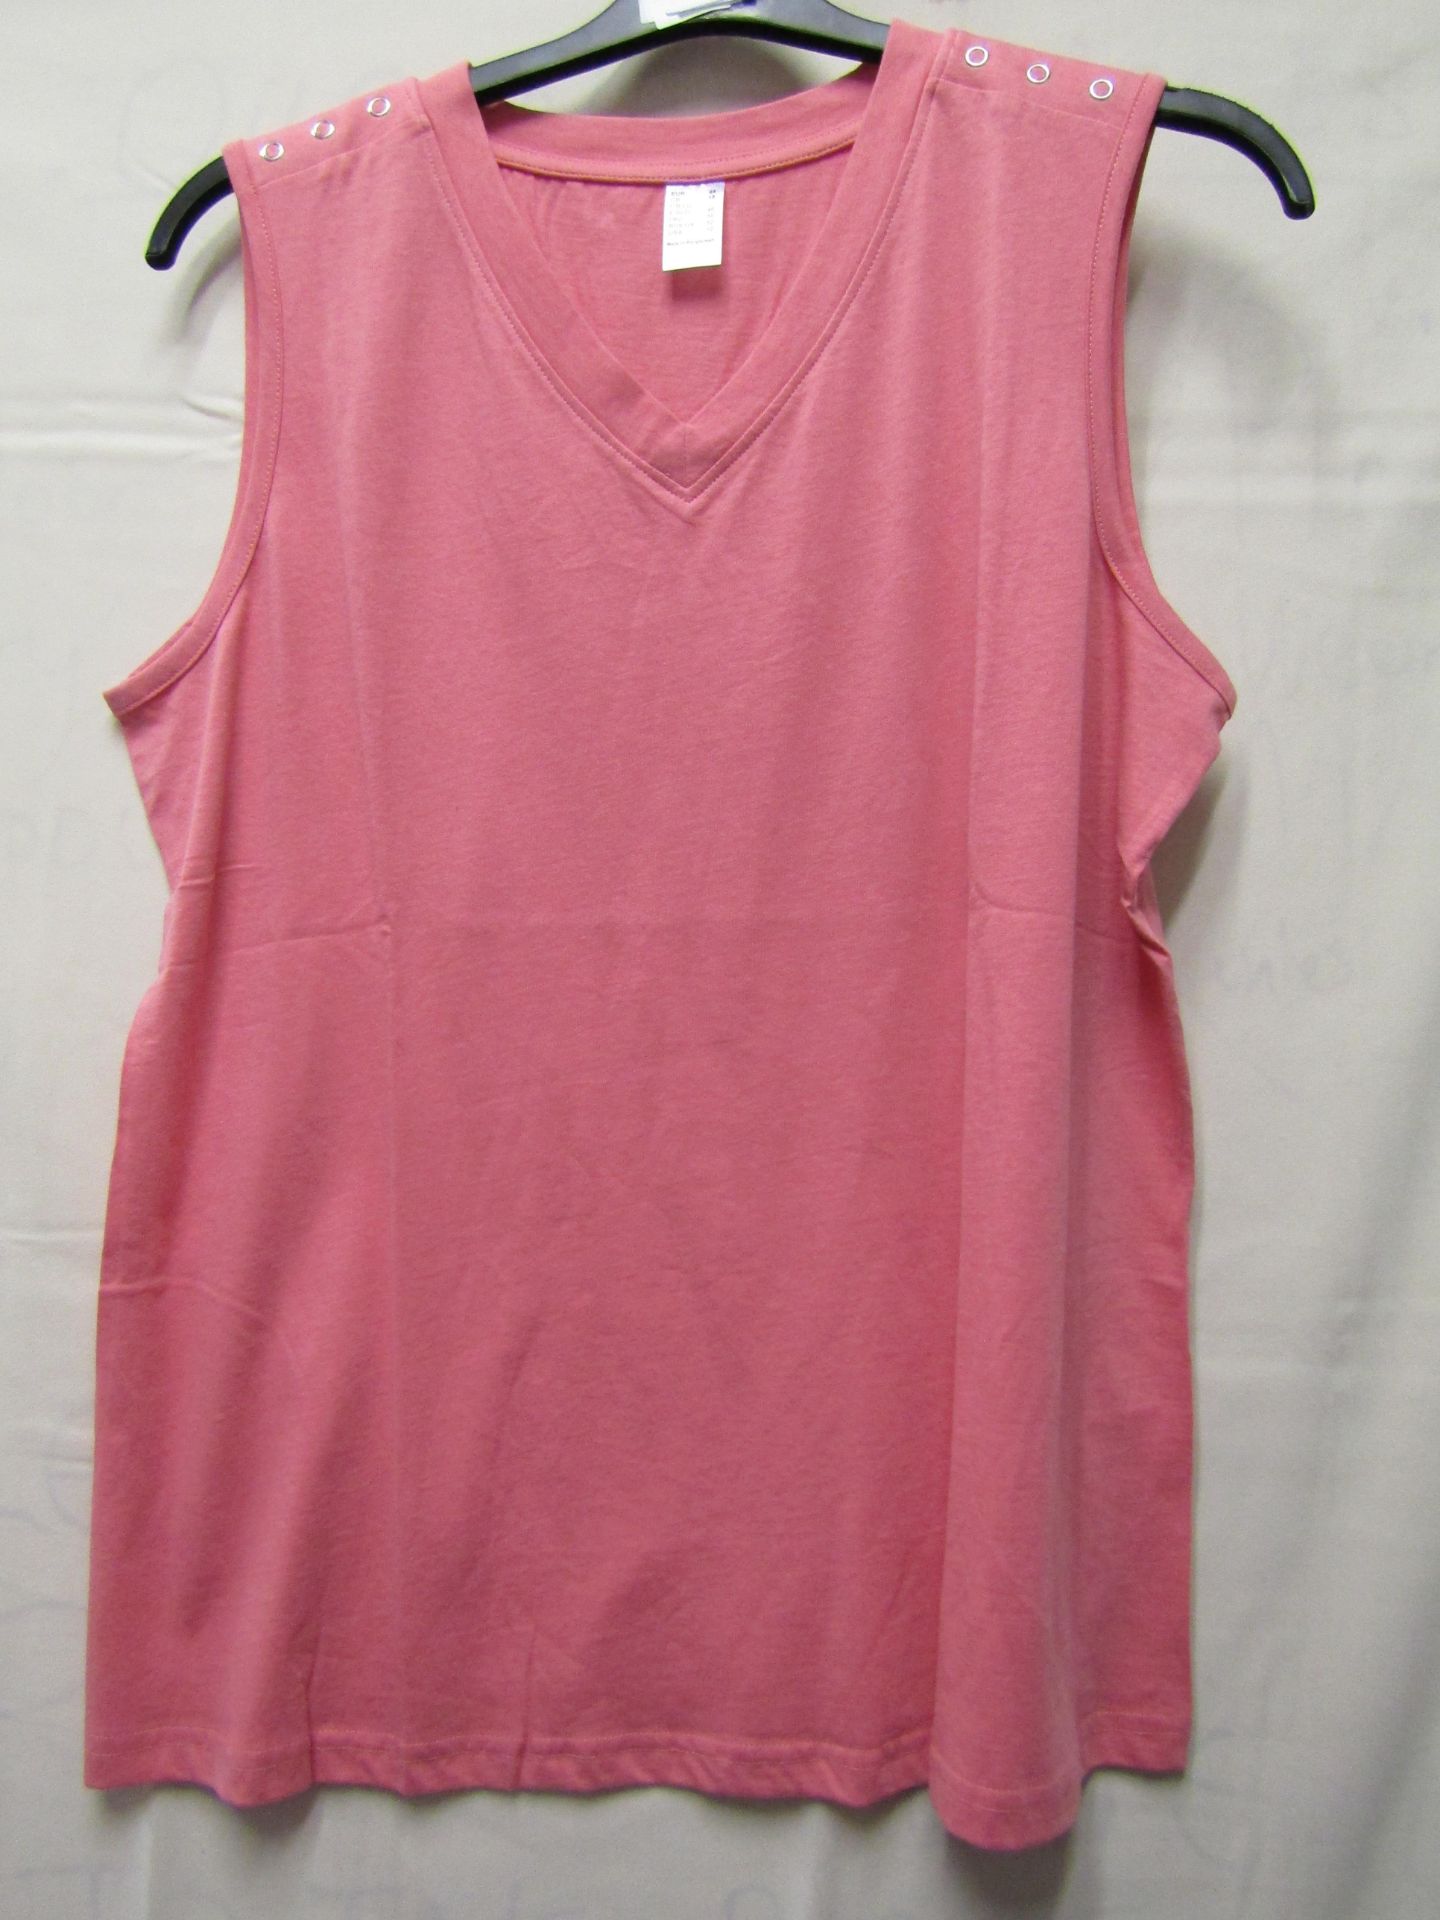 Unbranded Sleeveless T/Shirt Ladies Size 18 Salmon Colour New No Tags